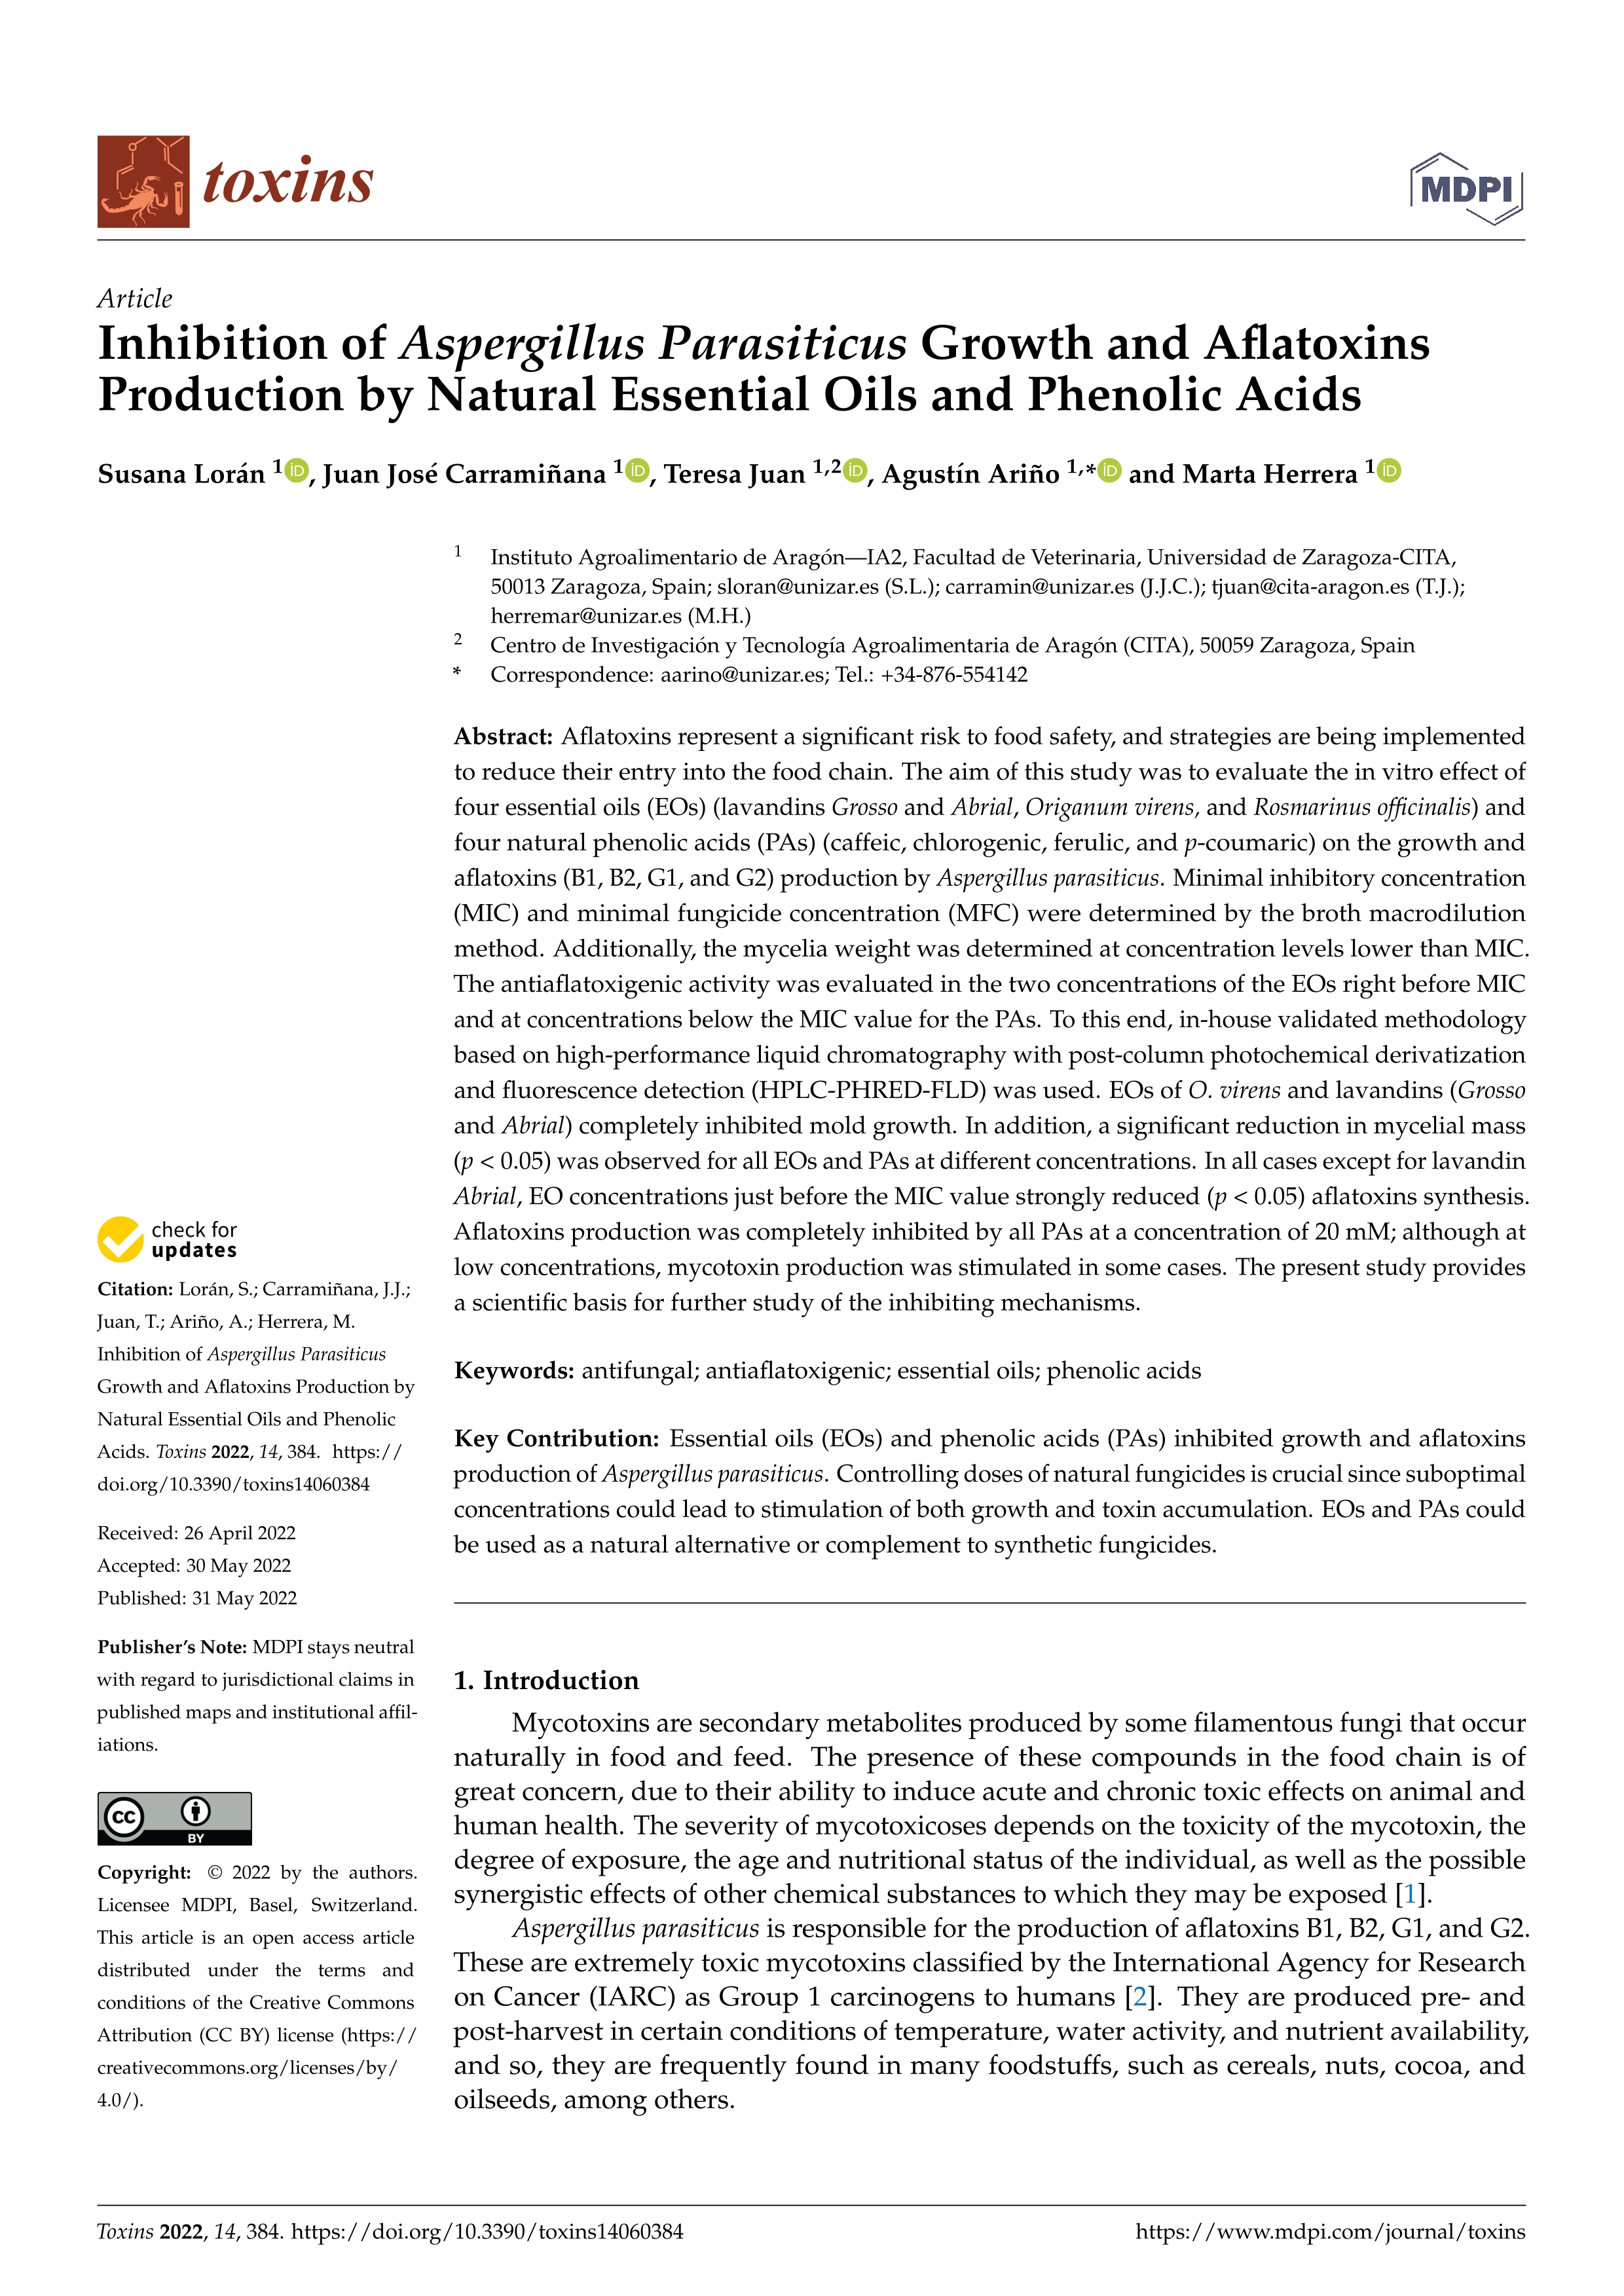 Inhibition of Aspergillus parasiticus growth and aflatoxins production by natural essential oils and phenolic acids